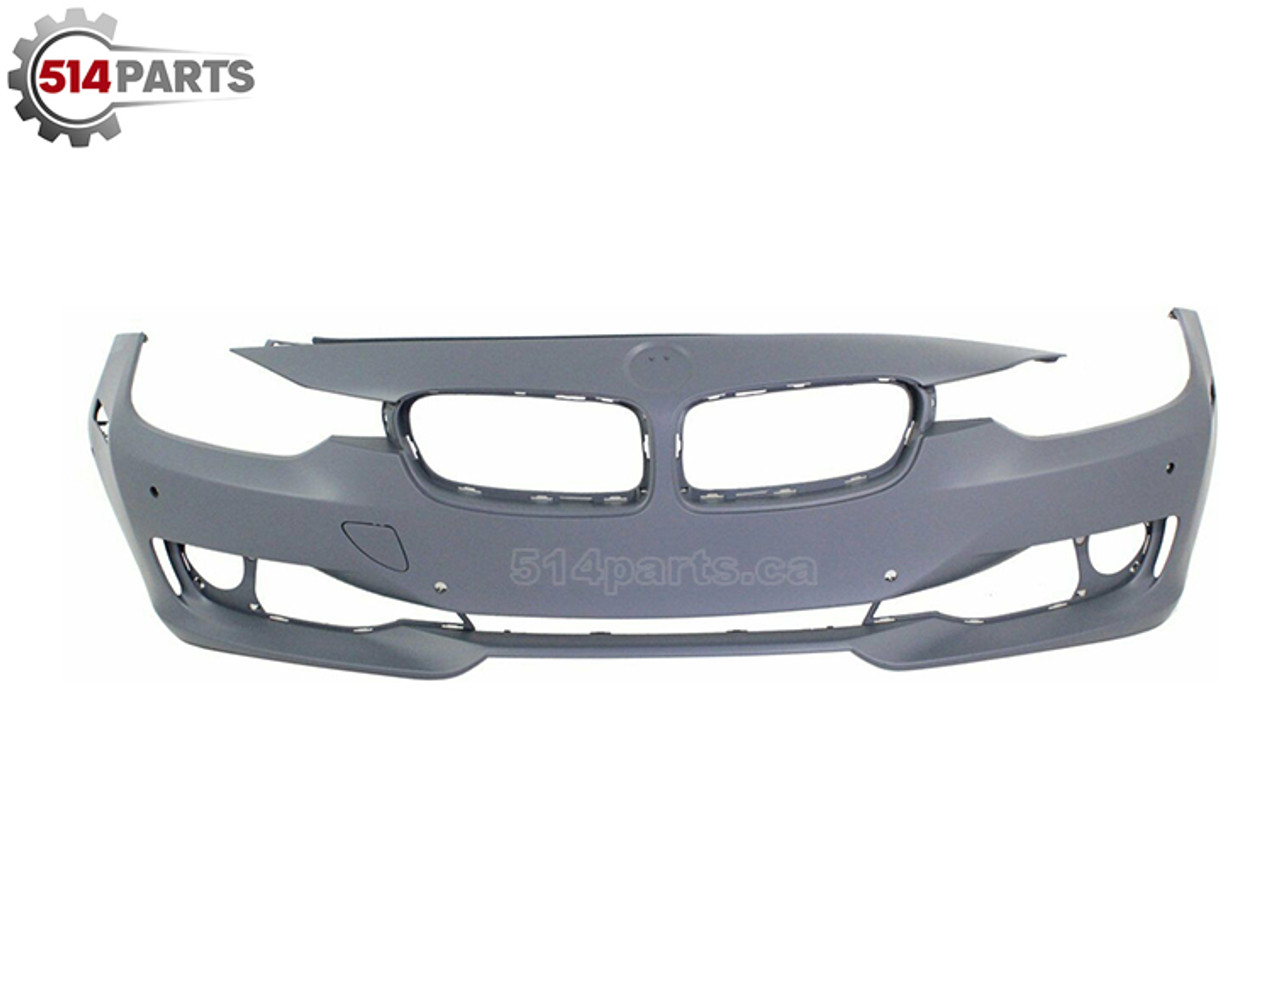 2012 - 2015 BMW 3 SERIES FRONT BUMPER with SENSORS/CAMERA without HEADLIGHTS WASHER/PARK DISTANCE CONTROL/MOLDING HOLES- PARE-CHOC AVANT avec SENSOR/CAMERA sans LAVE PHARES/PARK DISTANCE CONTROL/MOLDING